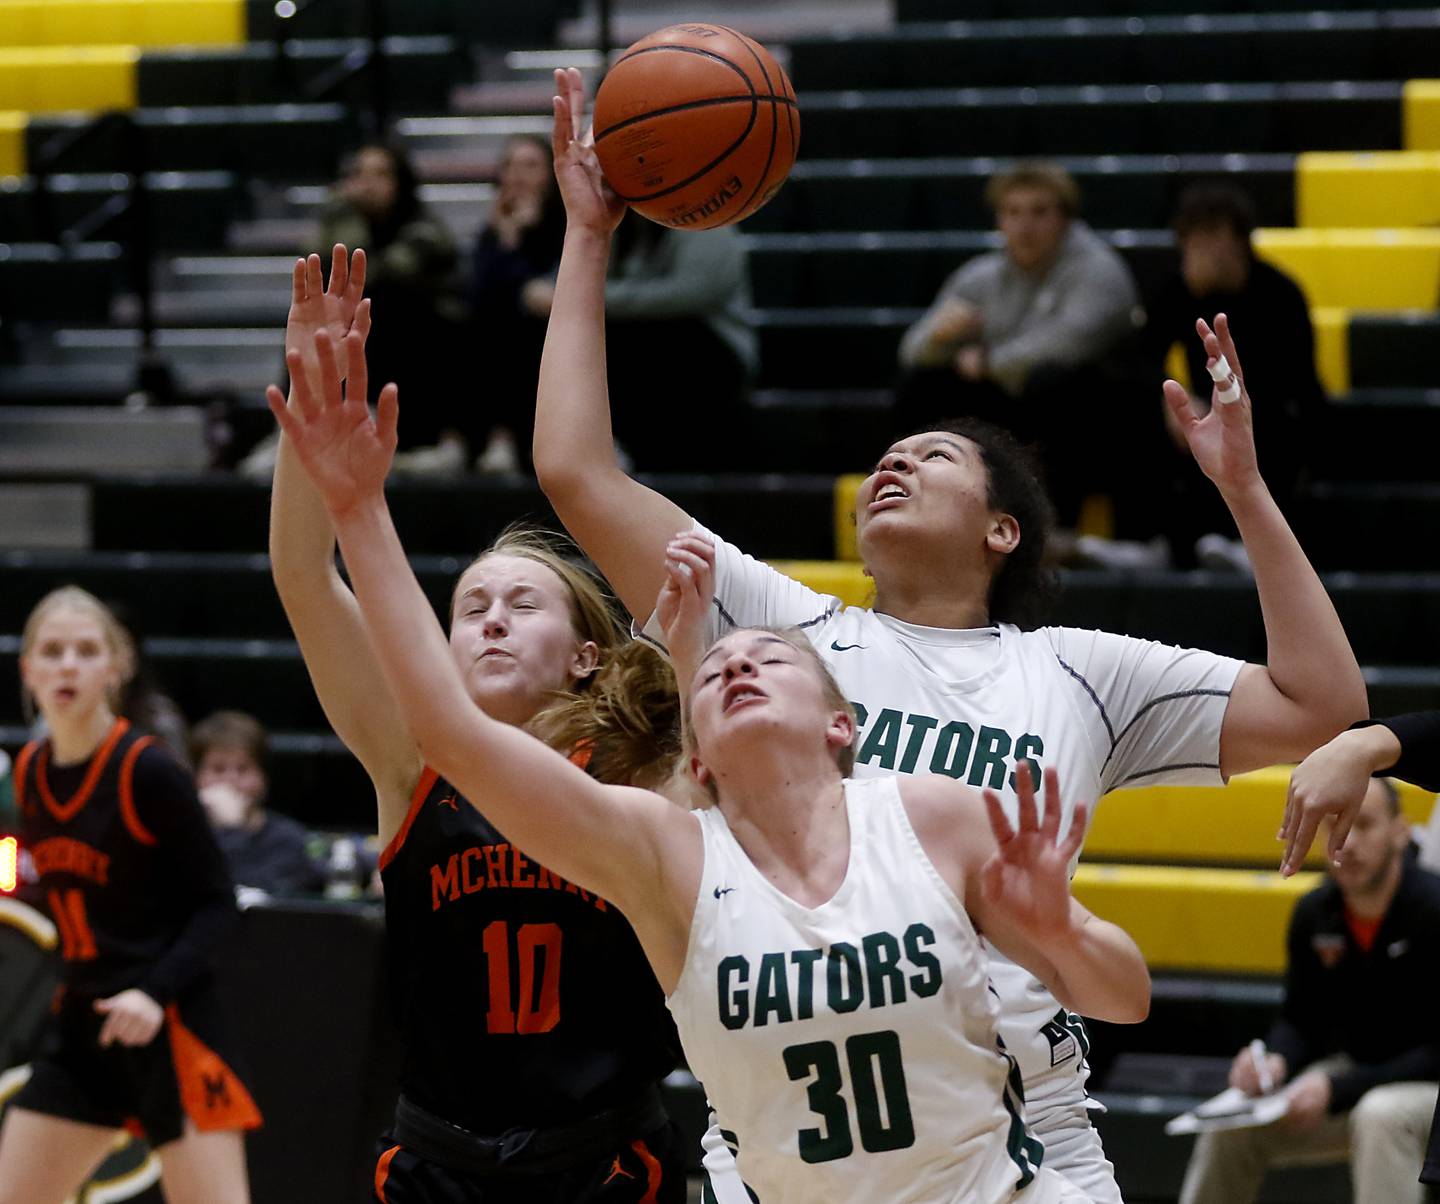 Crystal Lake South's Nicole Molagdo grabs a rebound over McHenry's Bethany Snyder  and her teammate. Hanna Massie, during a Fox Valley Conference girls basketball game Tuesday Jan. 10, 2023, at Crystal Lake South High School.